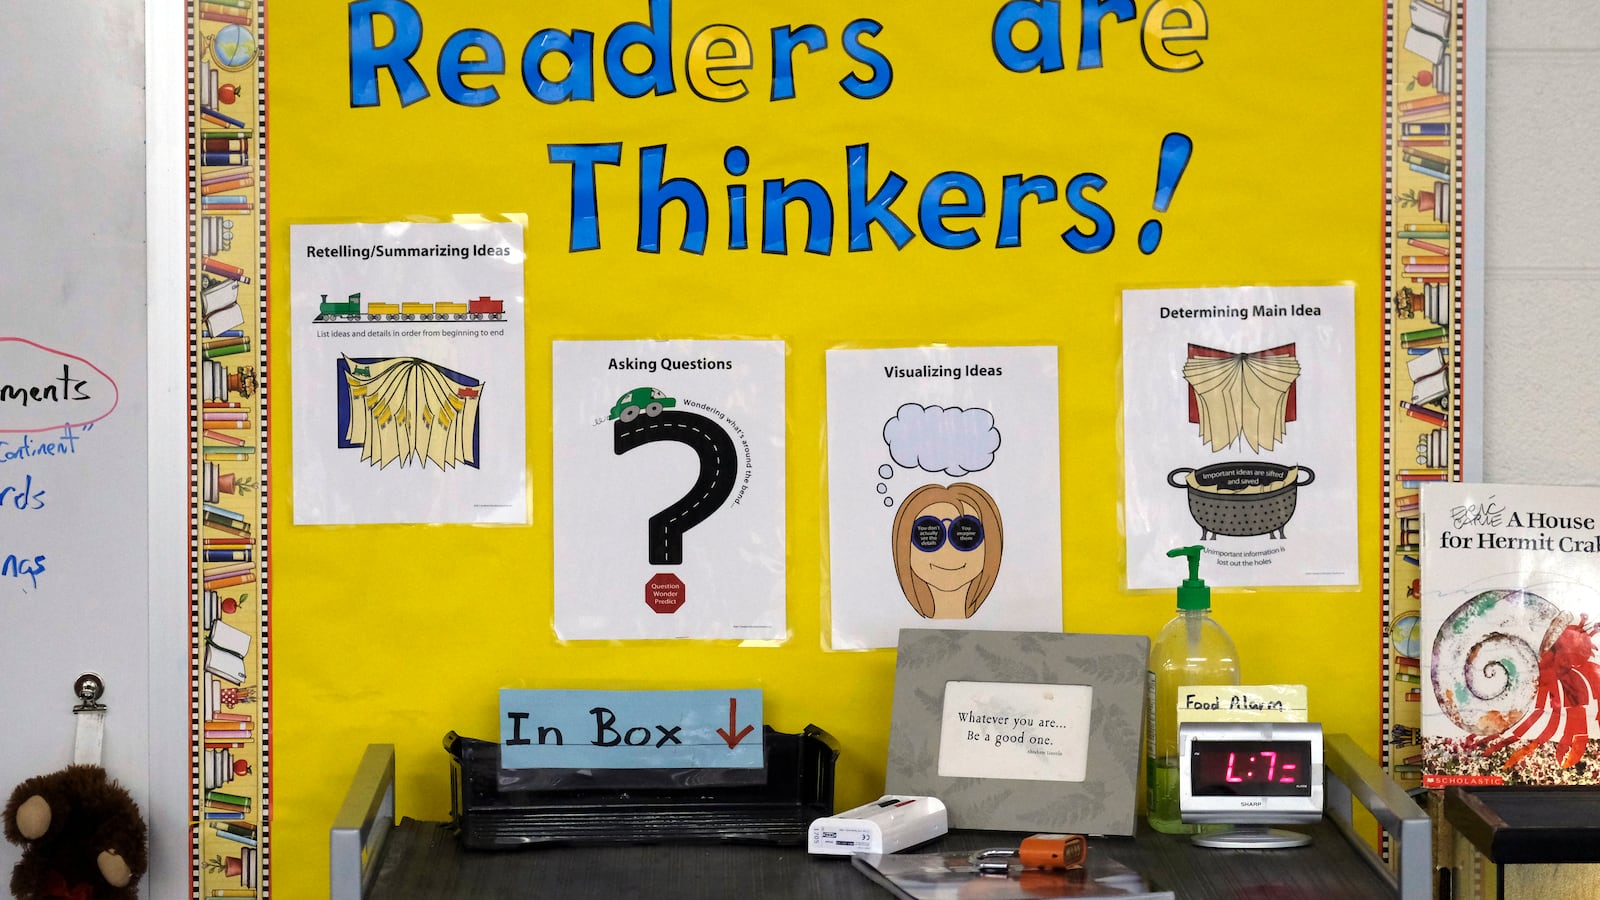 A yellow wall says “Readers are Thinkers!” in blue lettering. On the wall, are pieces of laminated paper that has pictures and words.